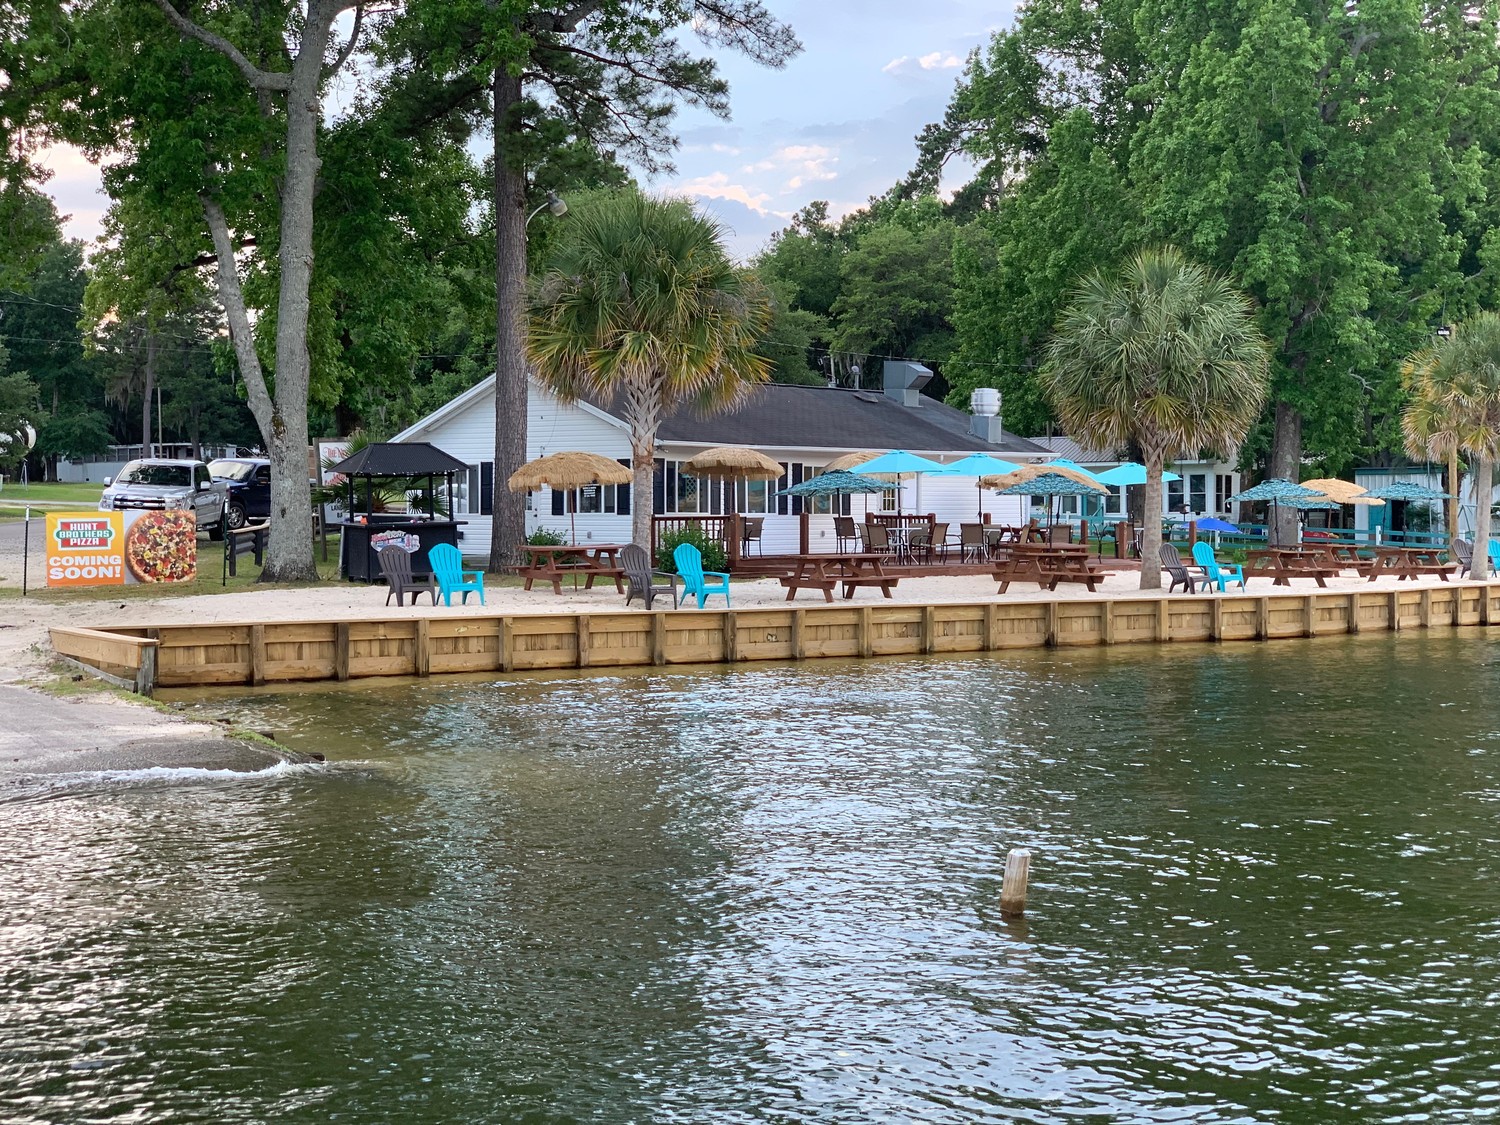 Lakeside Paradise Restaurant and Bubba's Bait & Tackle are on the